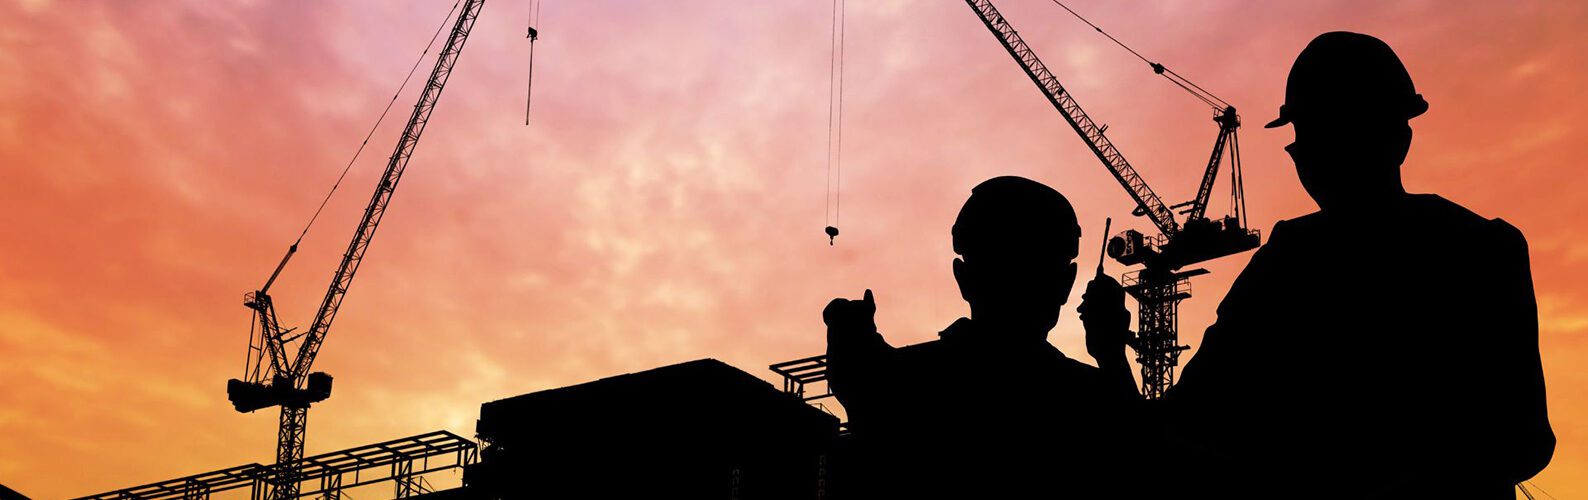 Construction sector kickstart: calls for action on workforce, housing supply and sustainability to revive struggling industry